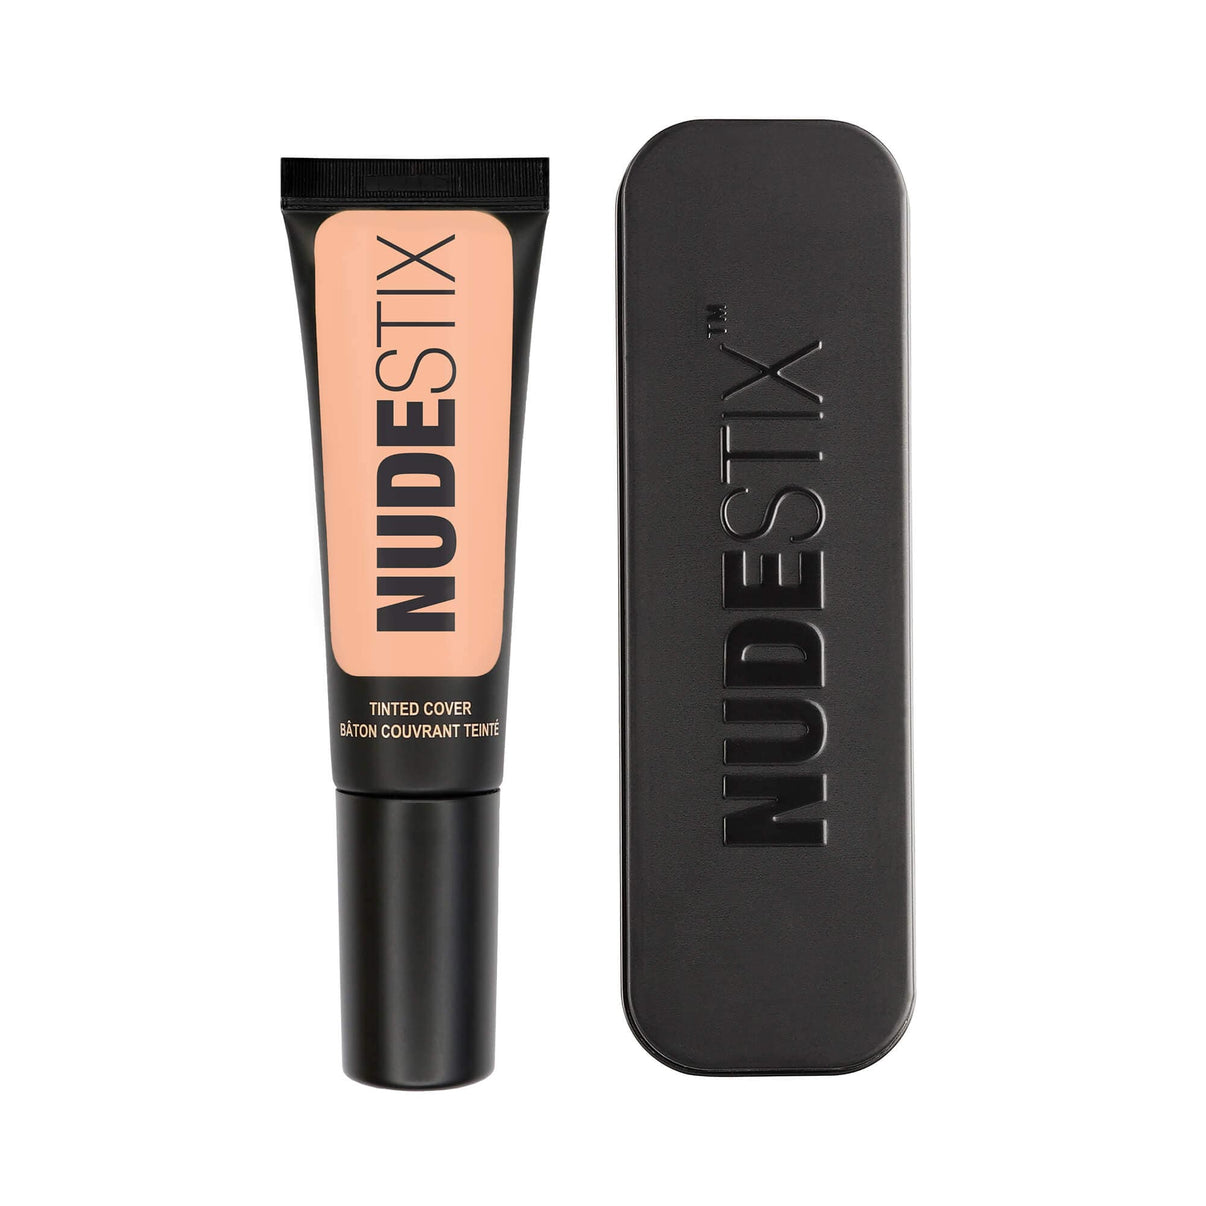 Tinted Cover Liquid Foundation in shade nude 3.5 with Nudestix can